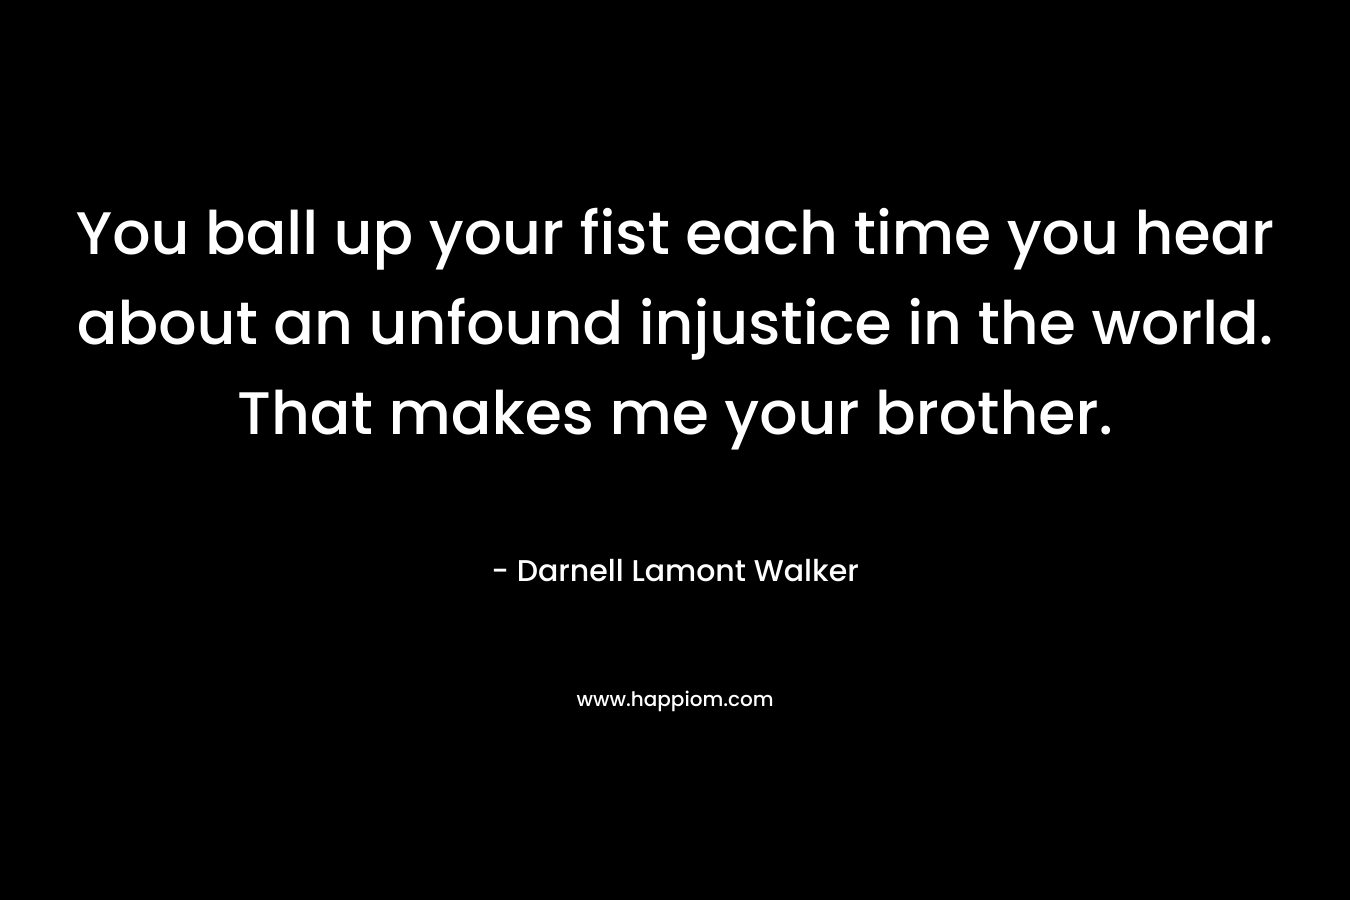 You ball up your fist each time you hear about an unfound injustice in the world. That makes me your brother.